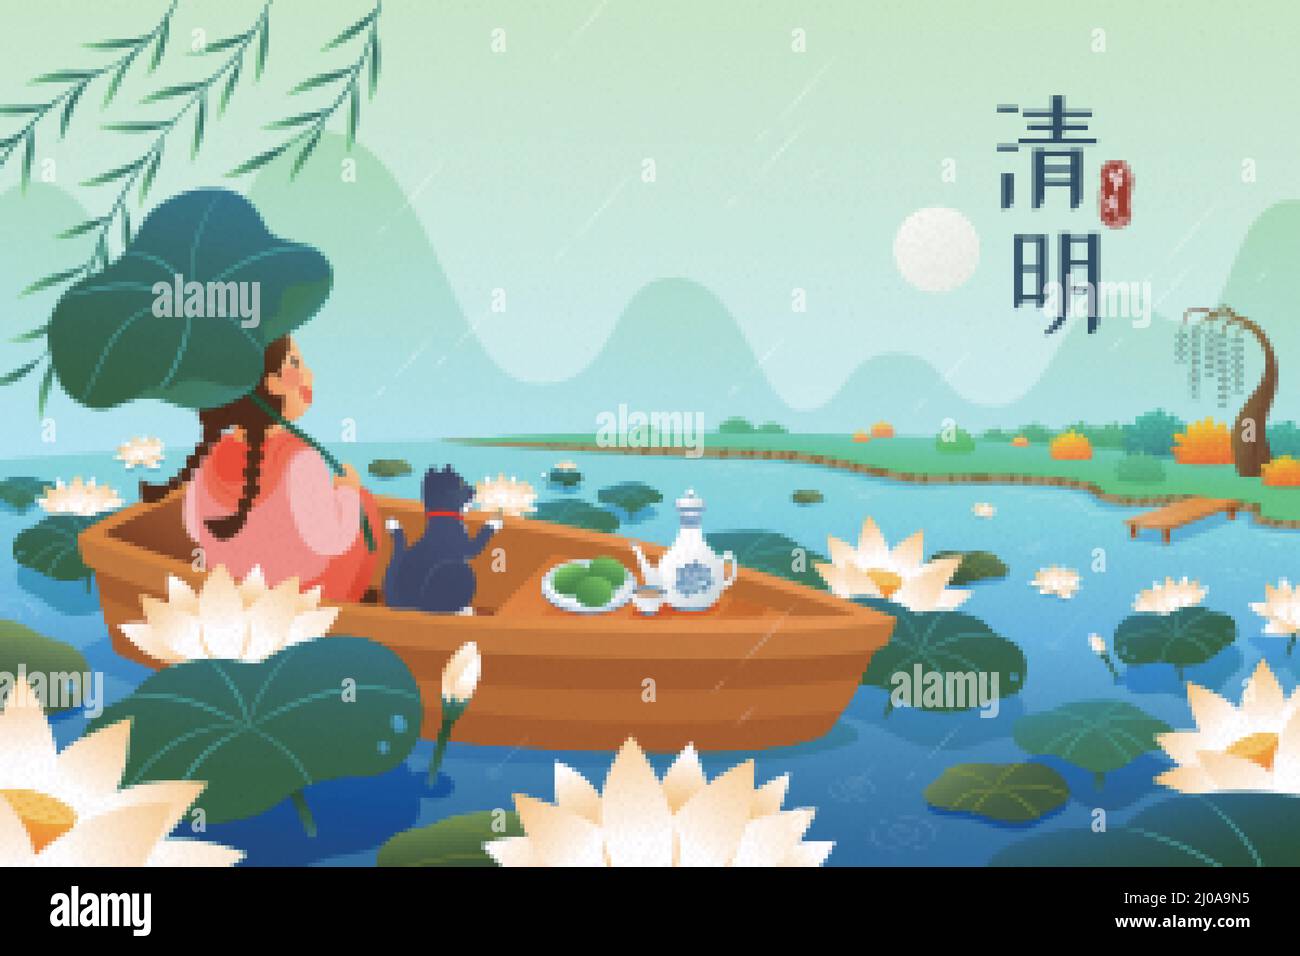 Qing Ming Festival banner. Asian girl on a boat watching the scenery alone in rain on a lotus pond. Translation: Qing Ming Festival Stock Vector